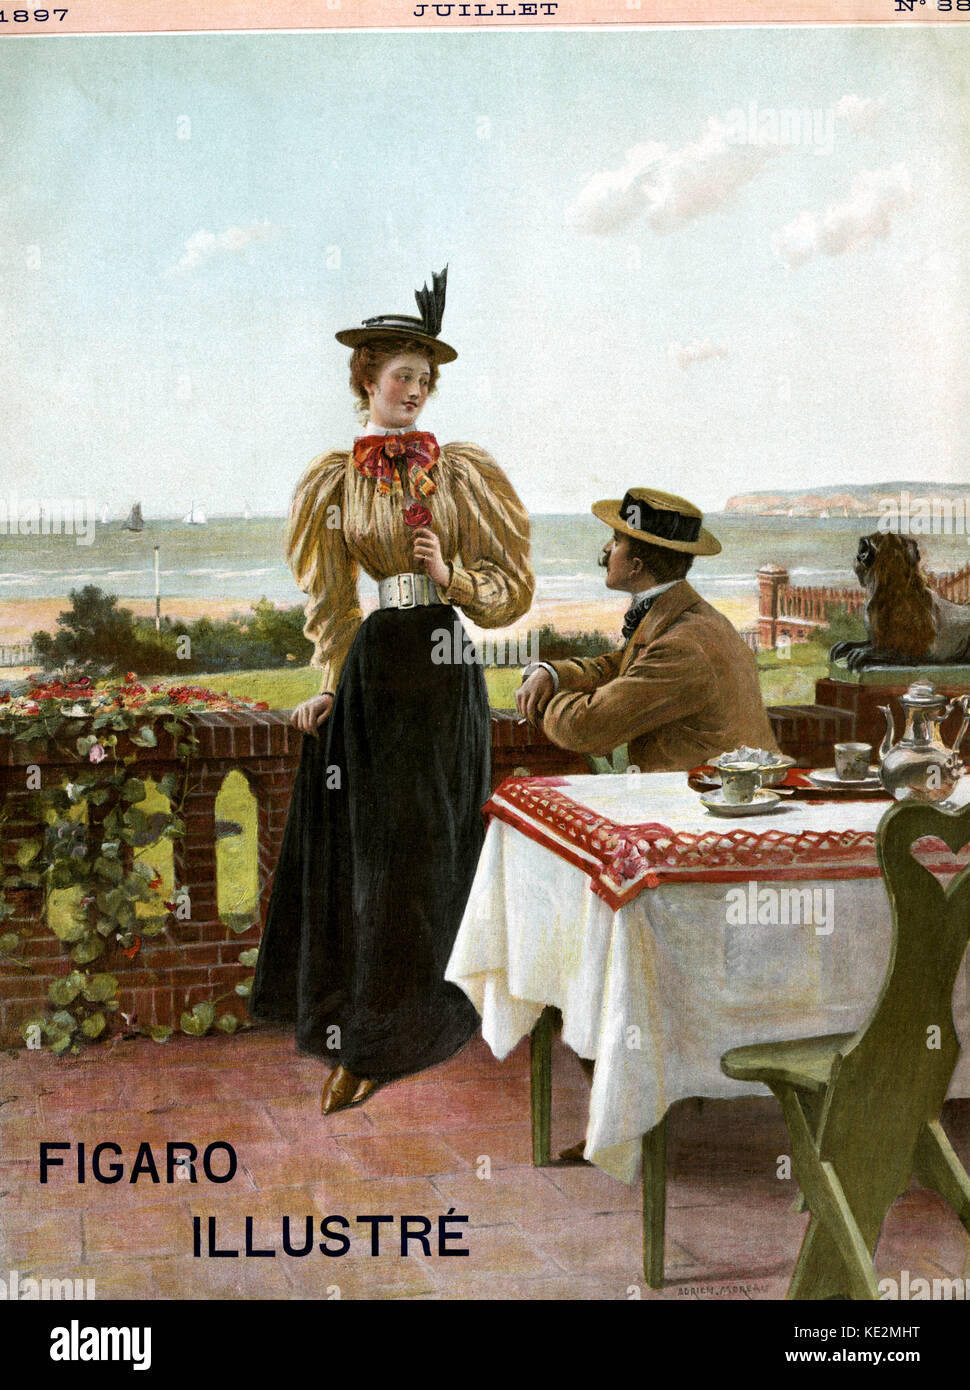 Courting couple at the seaside. Cover of Figaro Illustré, no. 88, July 1897. Woman is wearing typical 19th century outfit, with a blouse with leg of mutton sleeves, and a hat.  She is holding a rose in her hand as the man, seated, looks up at her.  He also wears a hat.   Illustration by Adrien Moreau (French painter, 18 April 1843 - 22 February 1906). Stock Photo